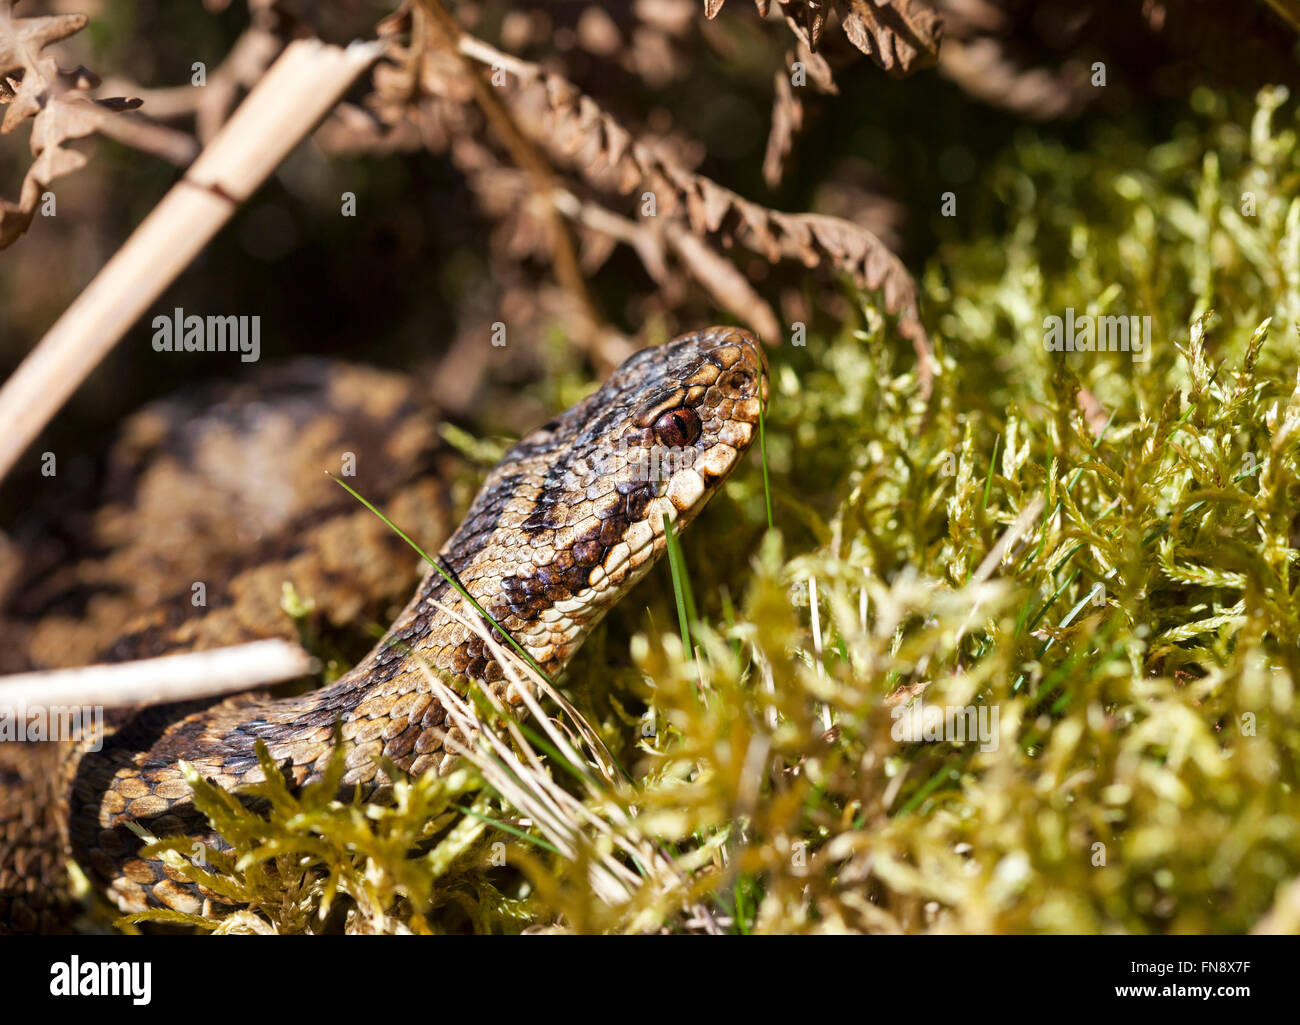 Teesdale, County Durham UK.  14th March 2016. UK Weather.  Warmer spring like weather conditions have brought the UK's only venomous snake the Adder (Vipera berus) out of hibernation (brumation) in the North Pennines.  While venomous the adder is a shy and retiring creature which rarely bites unless provoked. They are also protected from being killed, injured, or sold under the Wildlife and Countryside Act 1981. Stock Photo